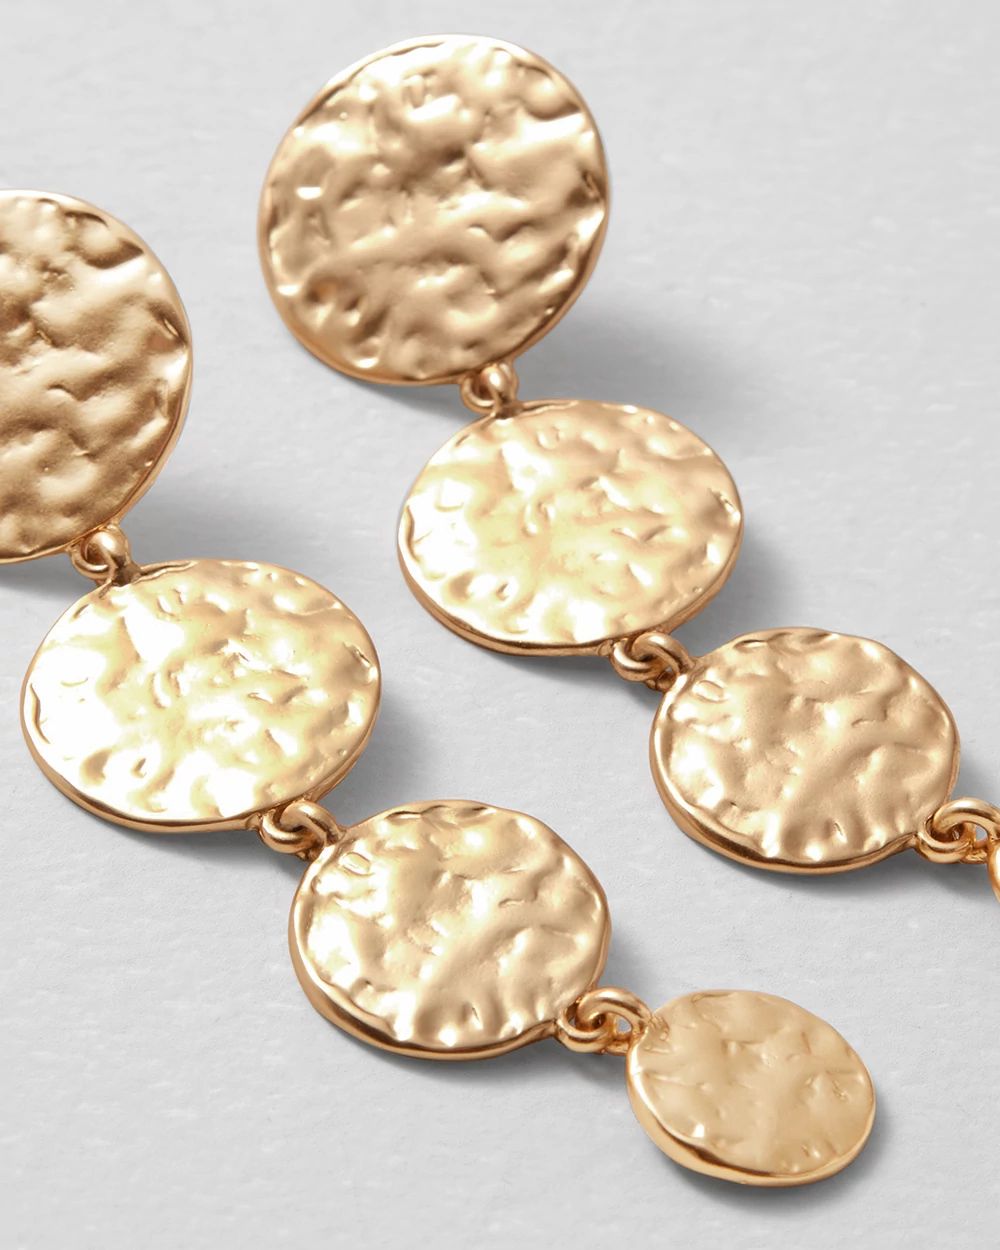 Goldtone Coin Linear Earrings click to view larger image.